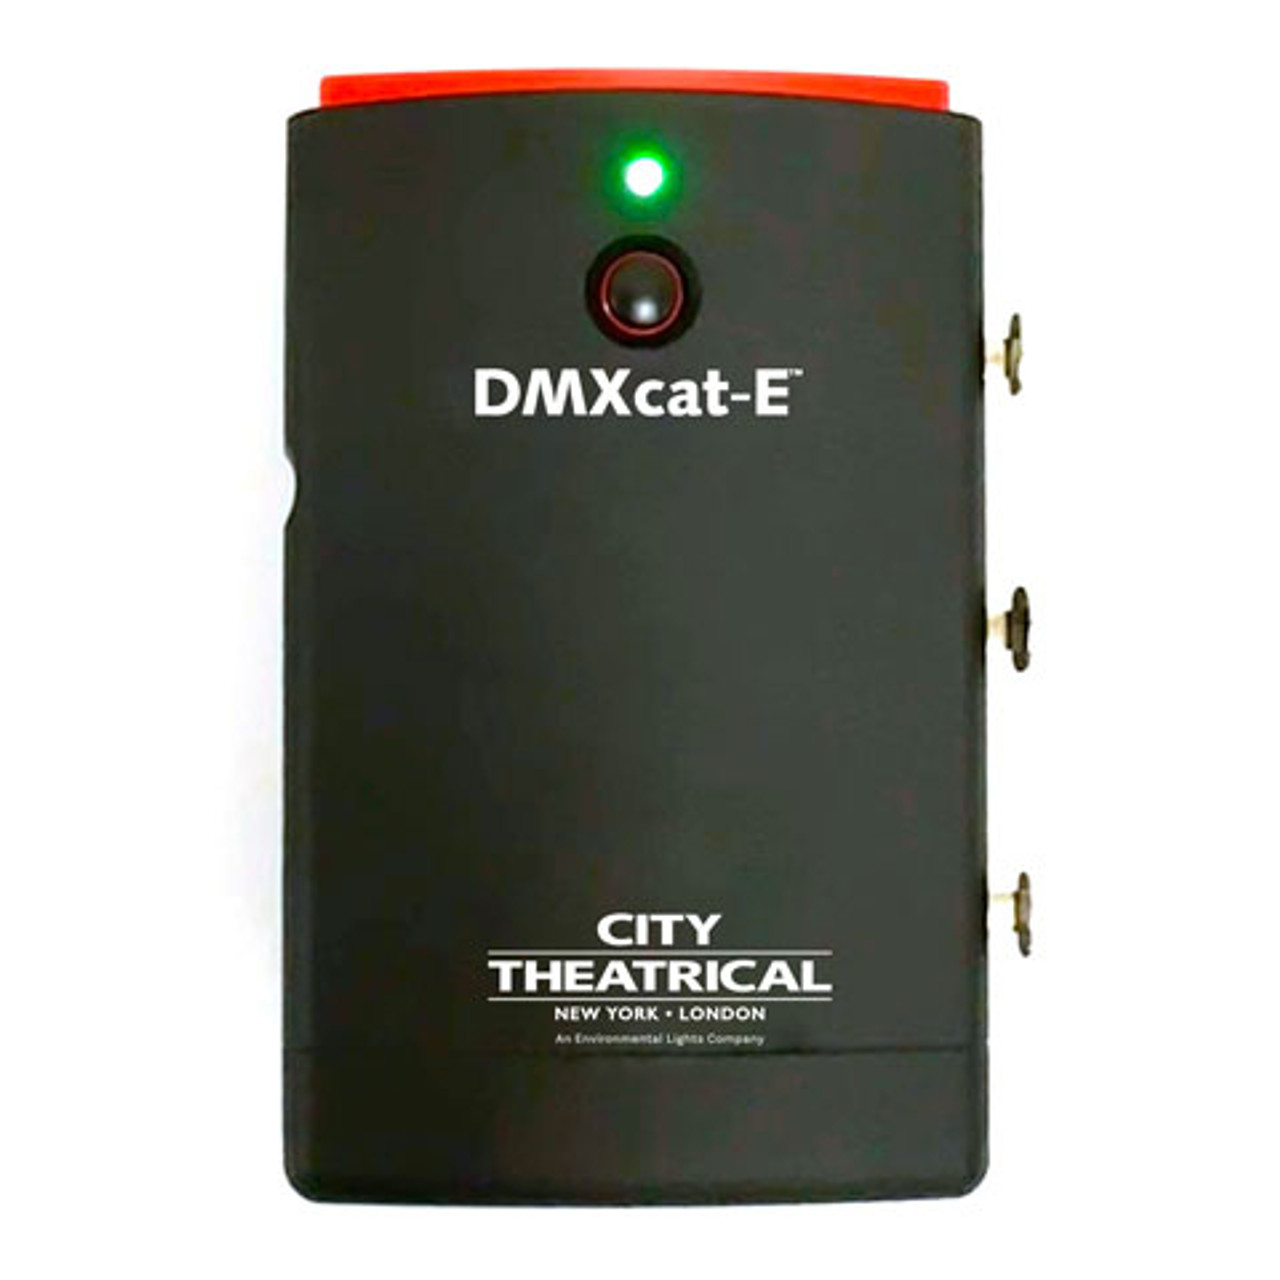 City Theatrical 6100 DMXcat-E™ Expanded Analyzer, Controller & Tester (6100)